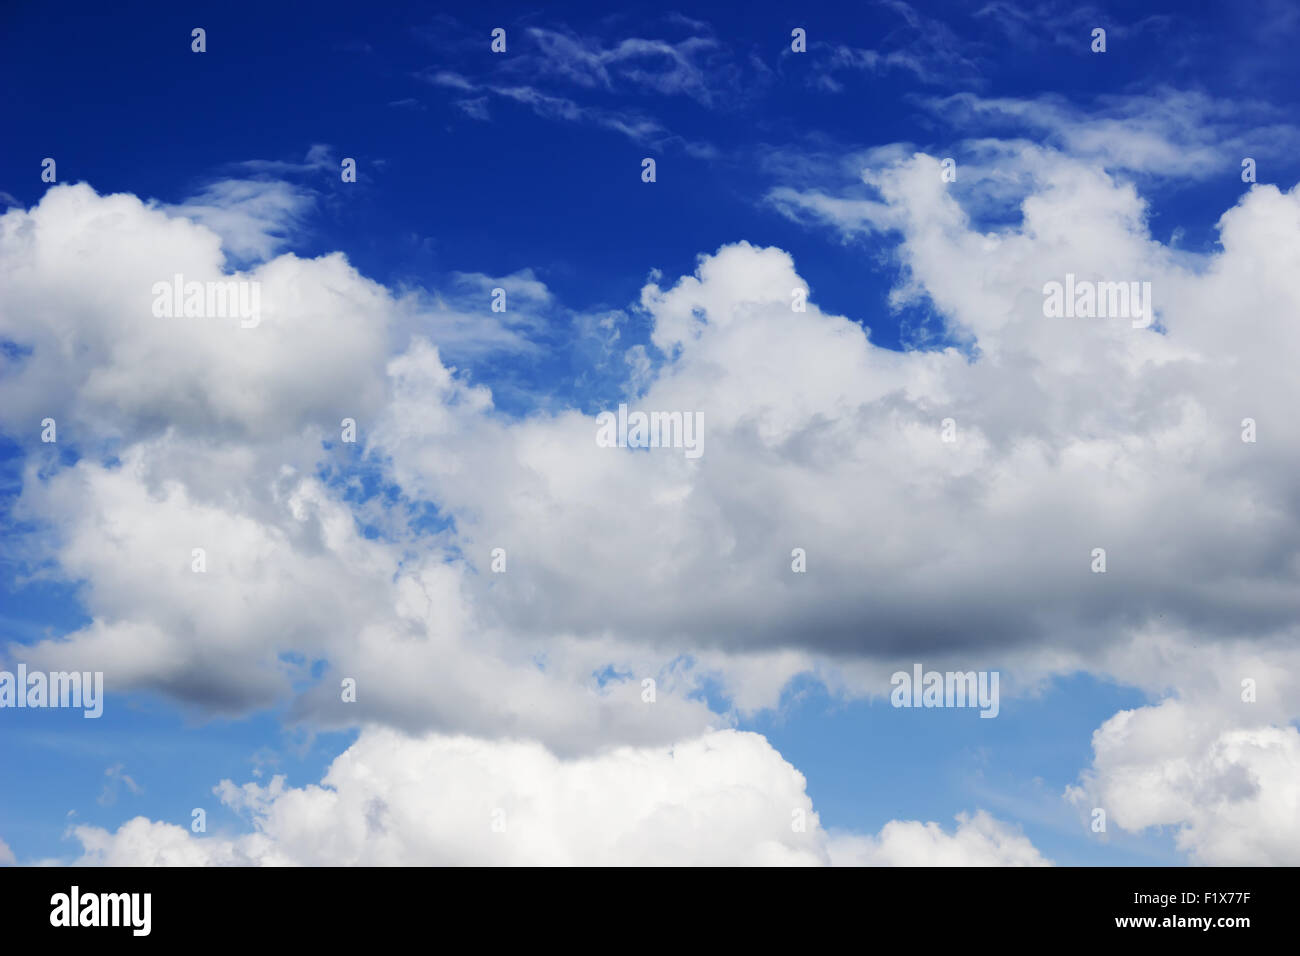 blue sky with white clouds. Stock Photo